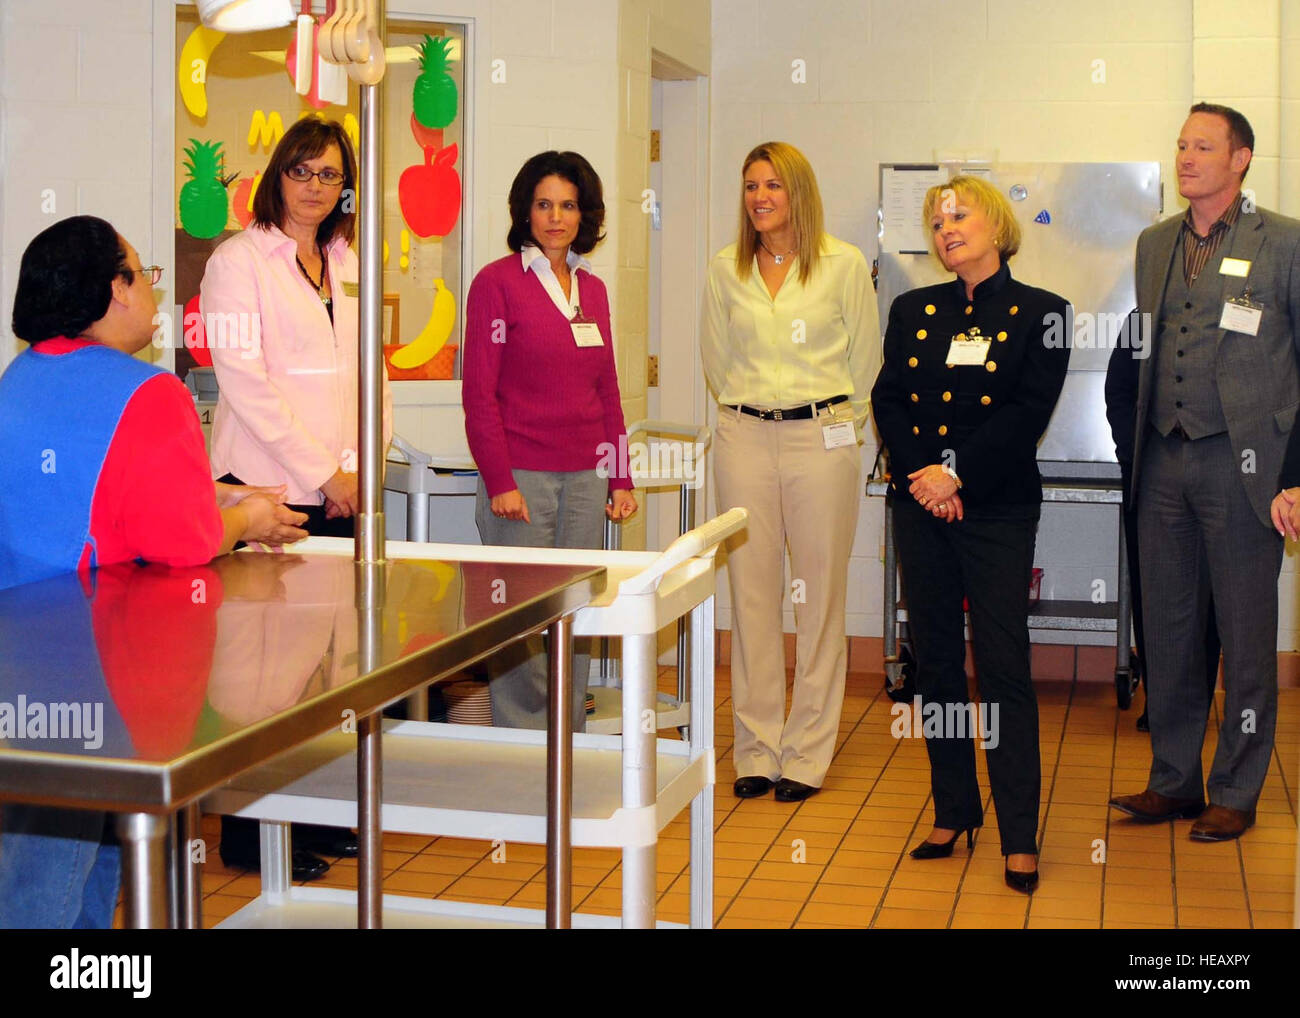 Melissa Delgado, a member of the Altus Air Force Base Child Development Center staff, briefs Laurie Salafia, CDC assistant chief, Leah Thomas, wife of 97th Air Mobility Wing commander, Maggie Elder, wife of the 97th AMW vice commander, Patty Solo, wife of 19th Air Force commander Maj. Gen. Mark Solo, and Anthony Raas, 97th Force Support Squadron, about how they prepare children's food at the CDC. During the tour, Solo was updated on the changes the CDC has undergone as well as the facility's accomplishments. Stock Photo